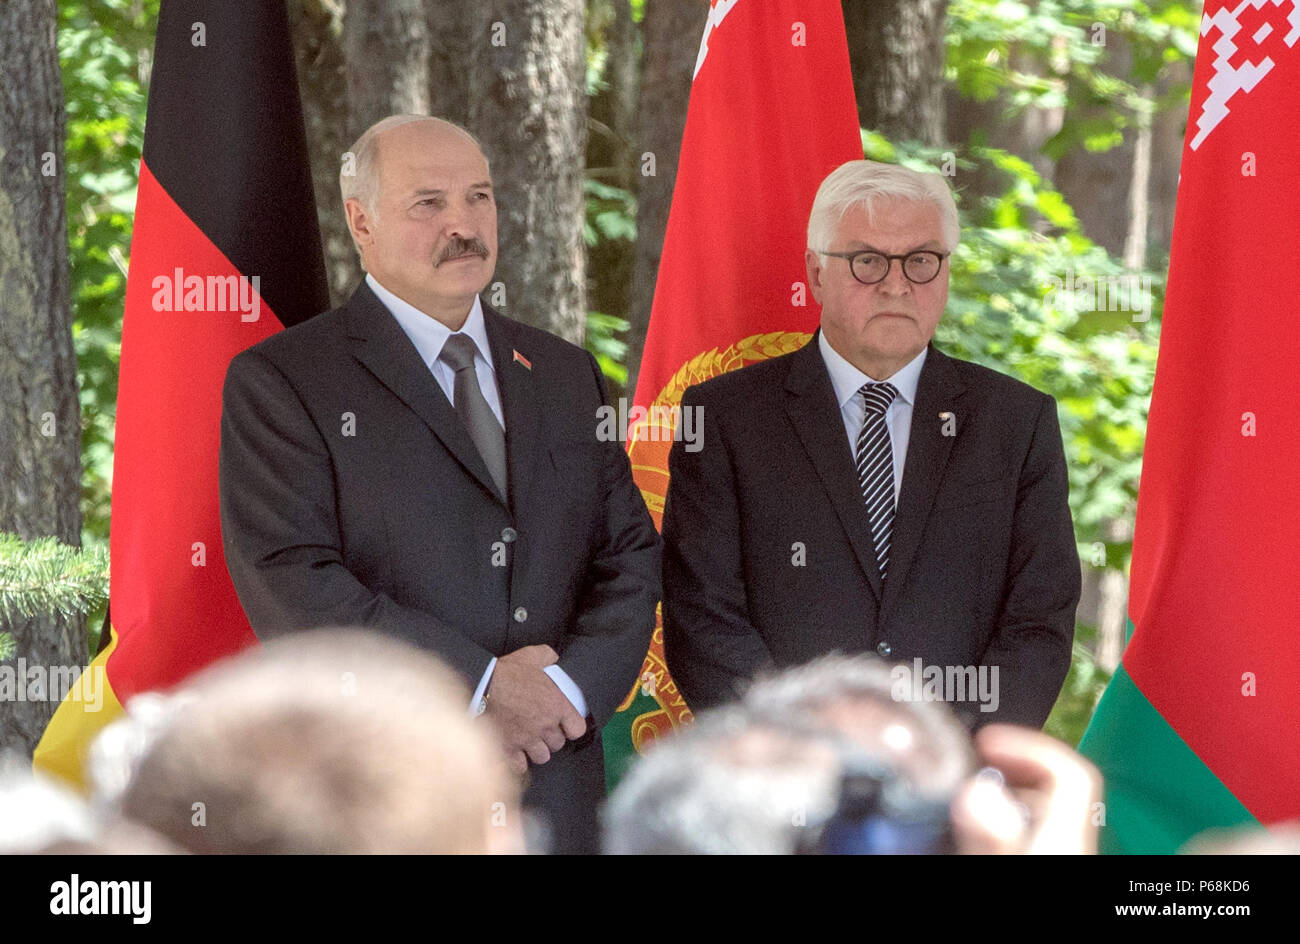 29 June 2018, Belarus, Minsk: German  President Frank-Walter Steinmeier (R, Social Democratic Party) and Alexander Lukashenko, Belarusian President, speak during the inauguration of the Malyj Trostenez Memorial. Malyj Trostenez was an Nazi extermination camp on former Soviet Union territory. Like many other extermination camps on Soviet territory, this camp is just known to few people in Germany and Europe. Photo: Jörg Carstensen/dpa Stock Photo